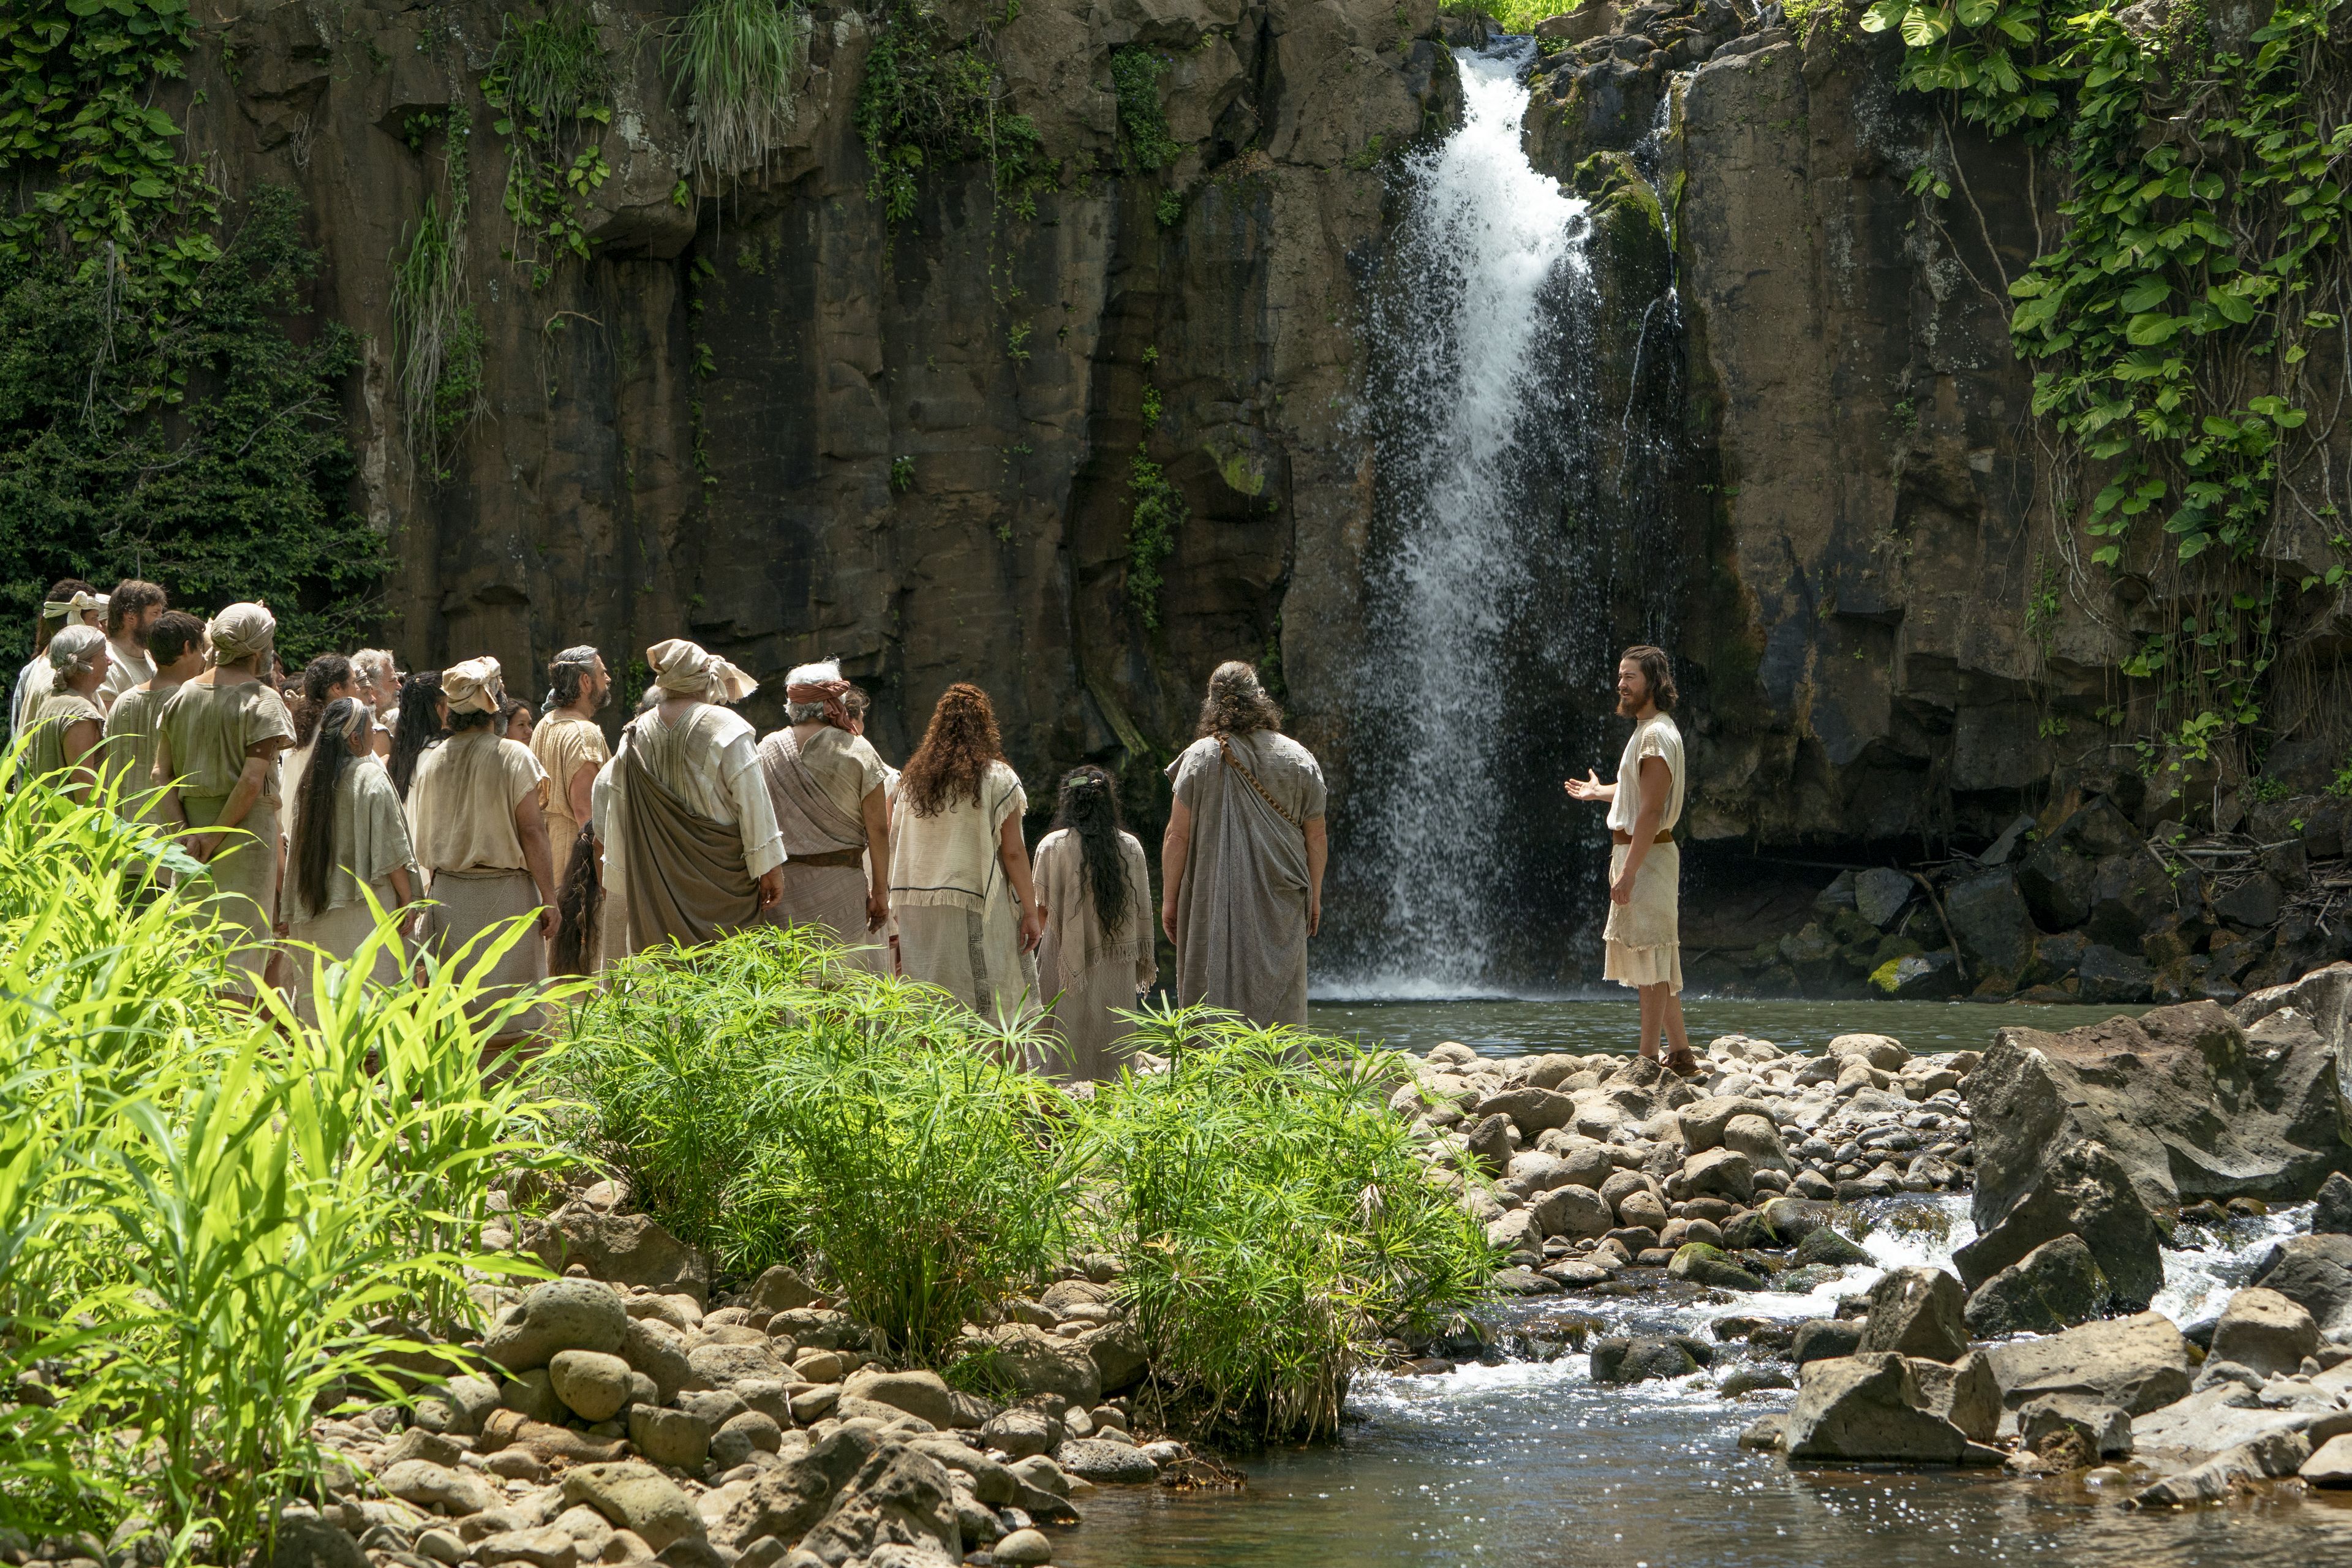 Alma prepares to baptize people at the Waters of Mormon.